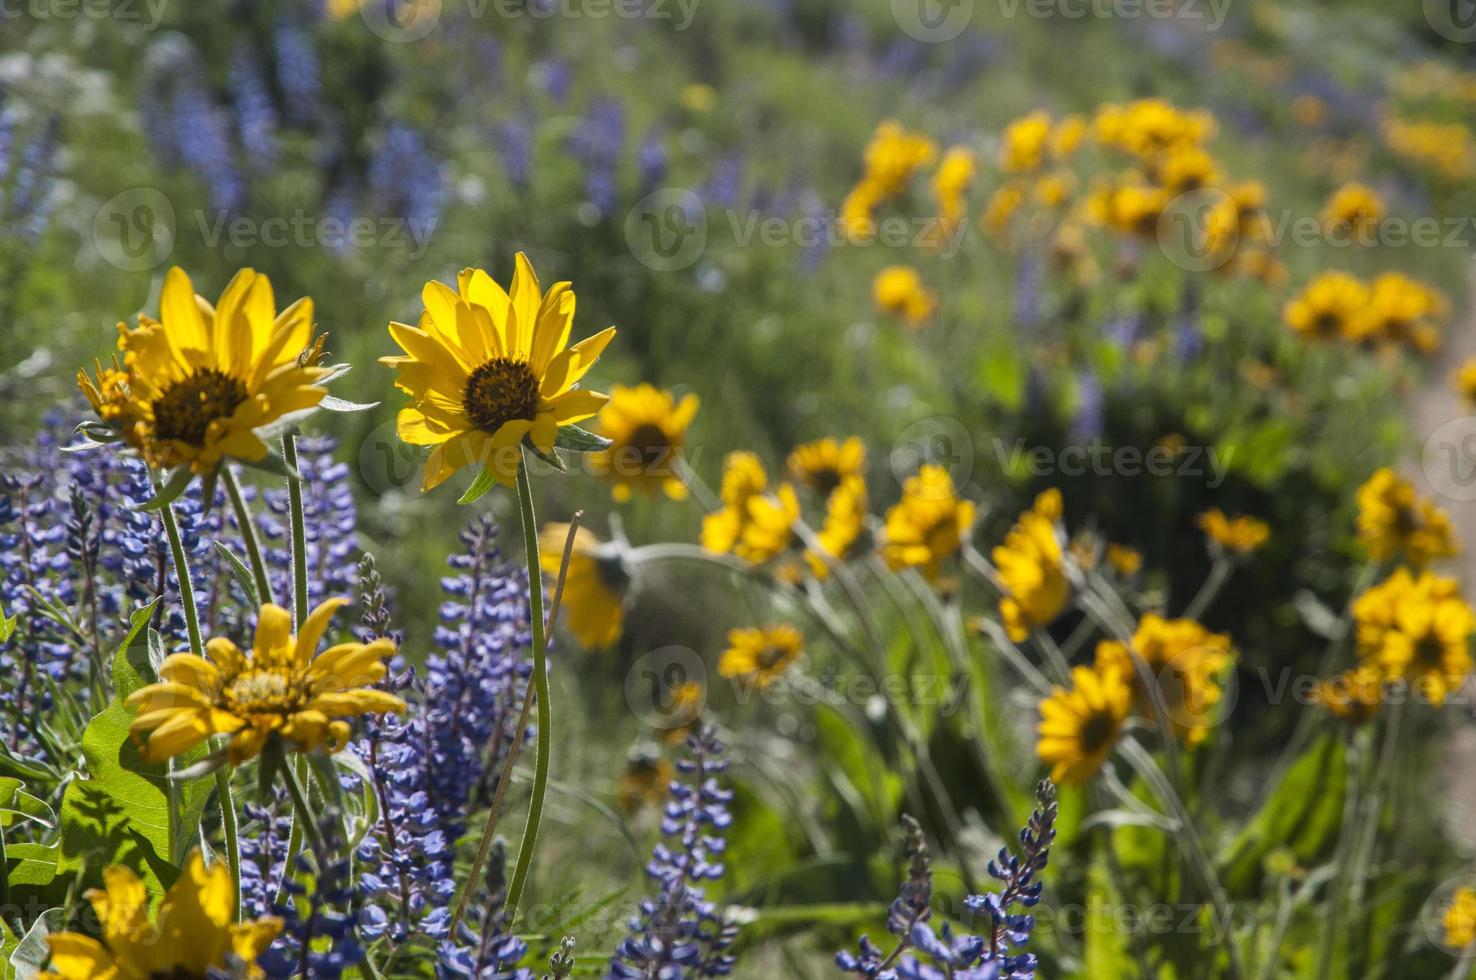 Yellow balsamroot or Balsamorhiza with purple lupines in the background photo